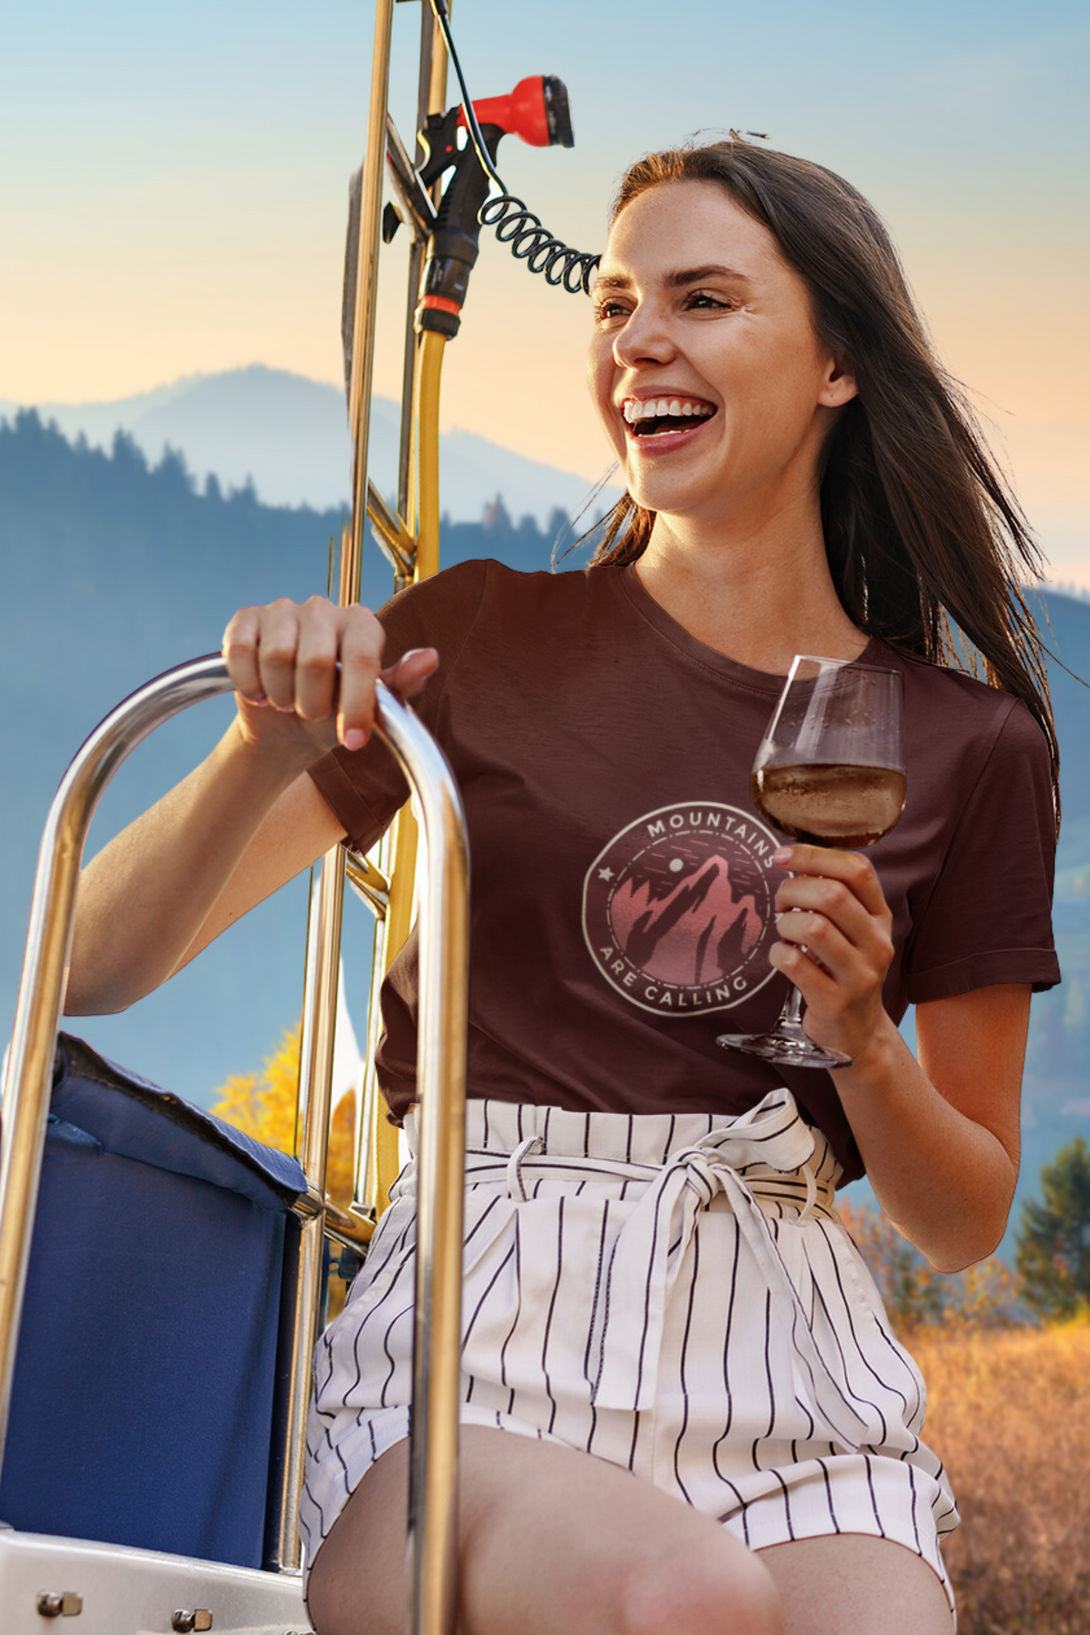 Mountains Are Calling Printed T-Shirt For Women - WowWaves - 2